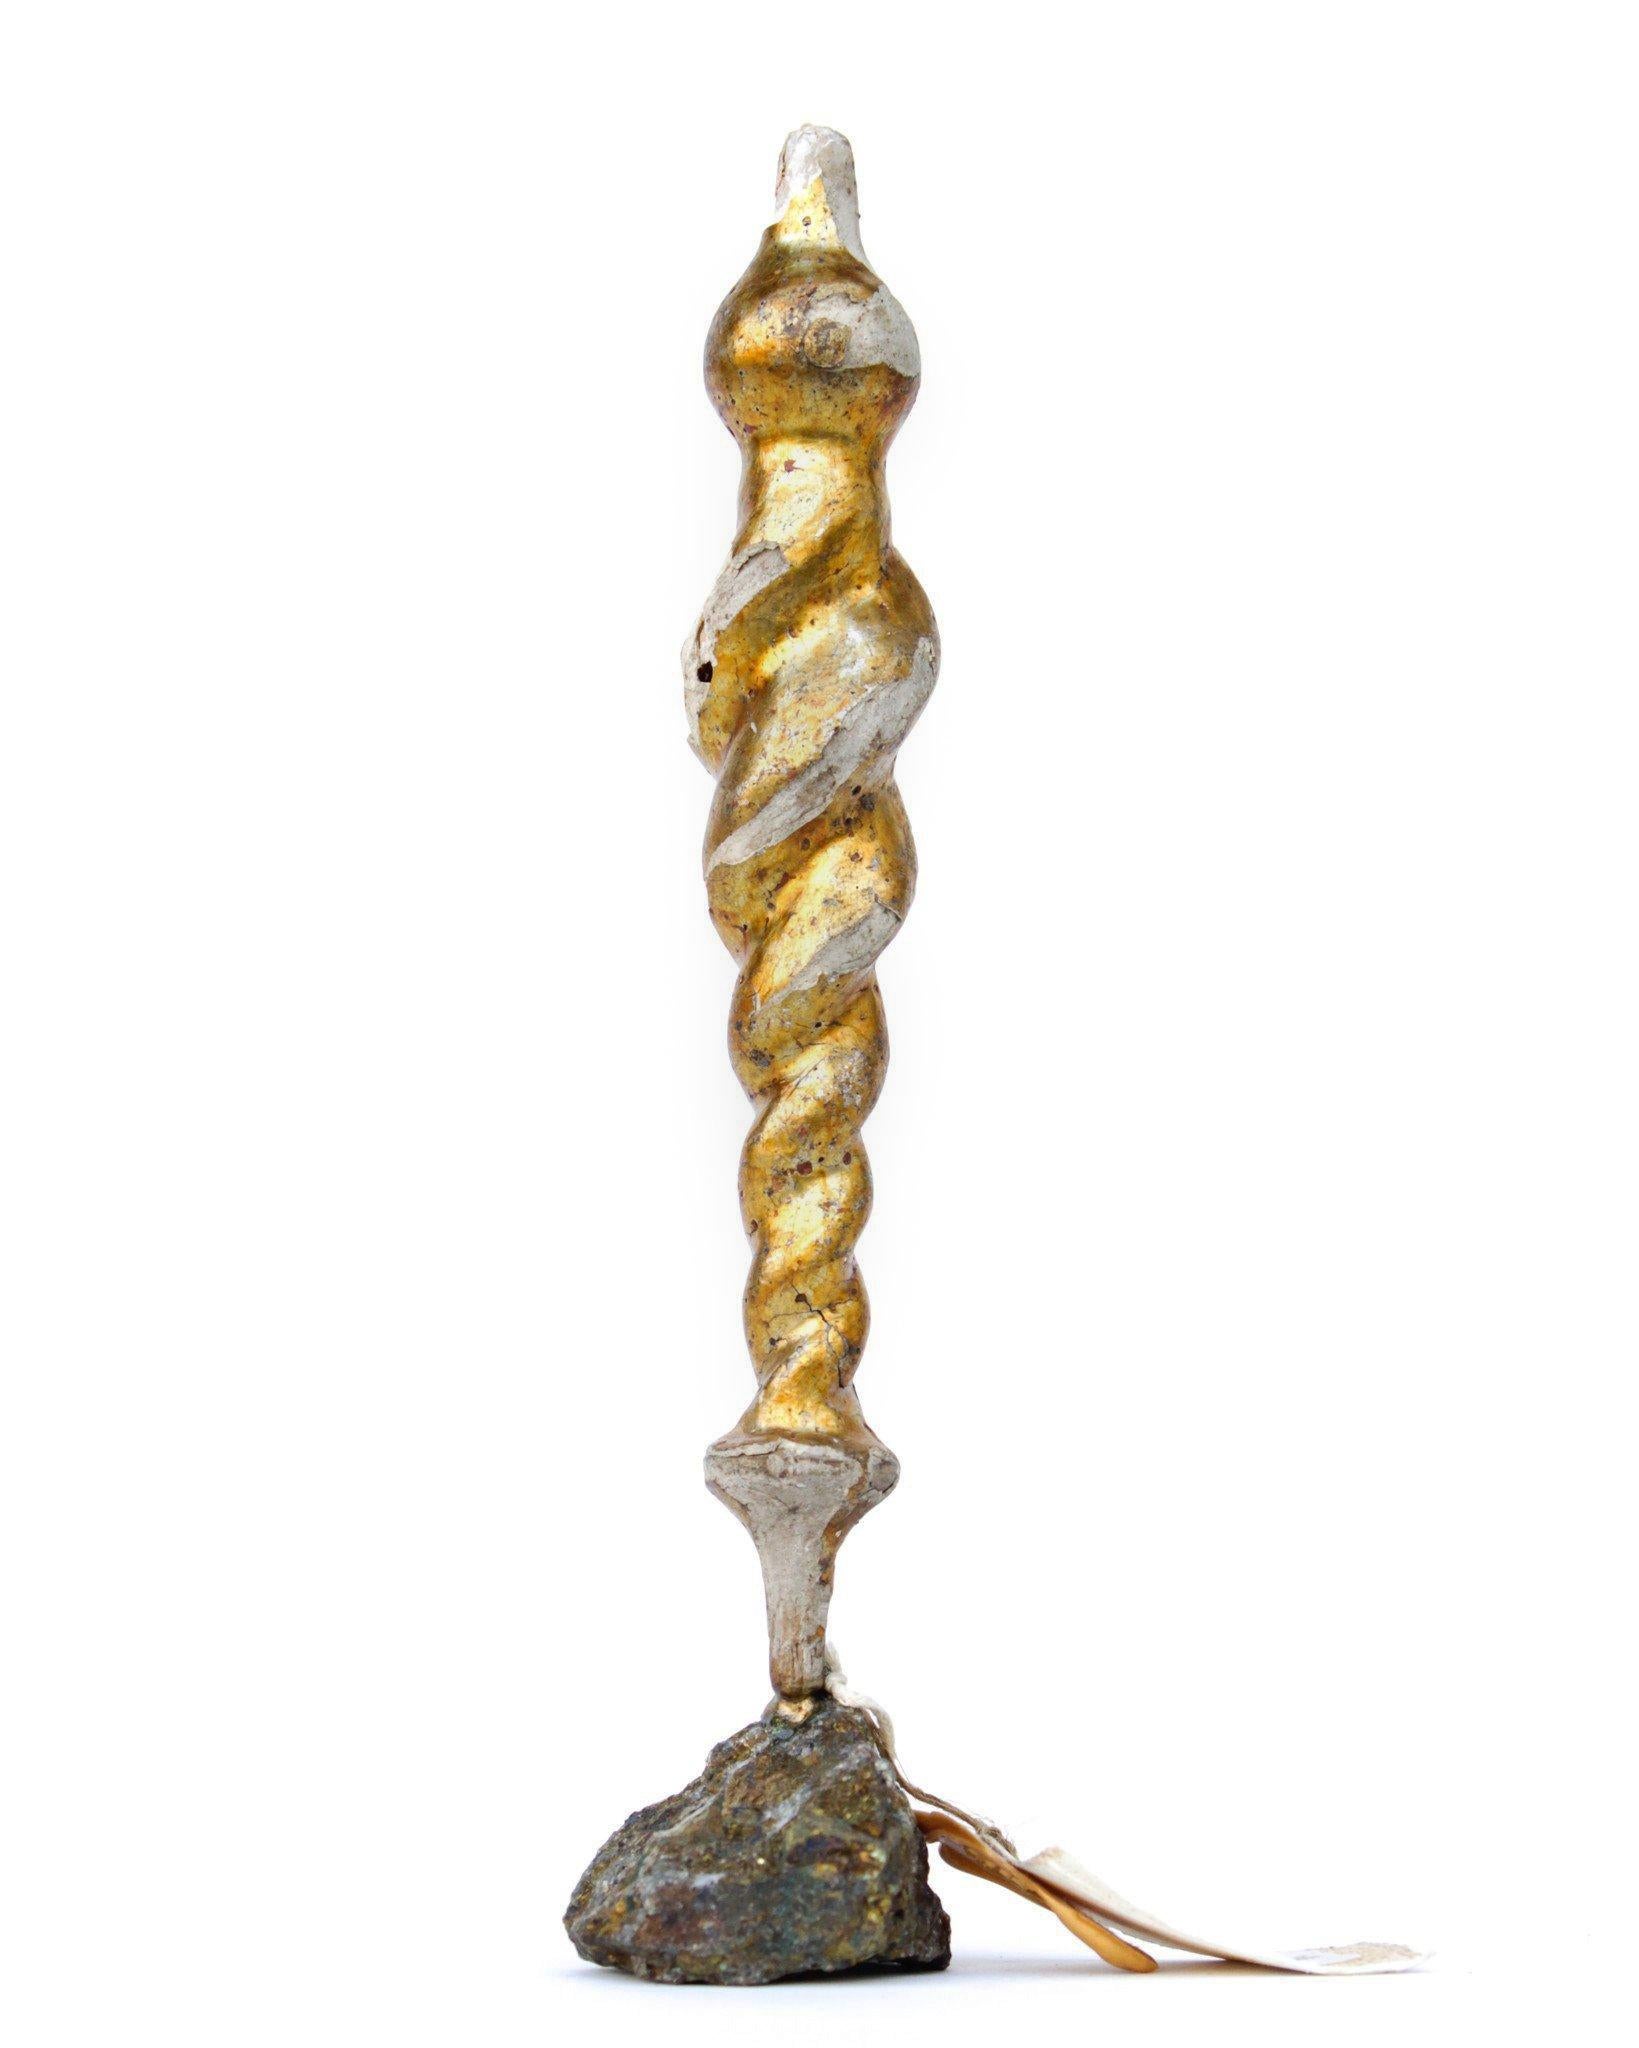 18th century Italian mecca hand carved tassel on a coordinating chalcopyrite mineral base. 

This tassel was originally hung from an 18th century Italian chandelier. Many tassels were used to decorate churches on religious feast days. Others were